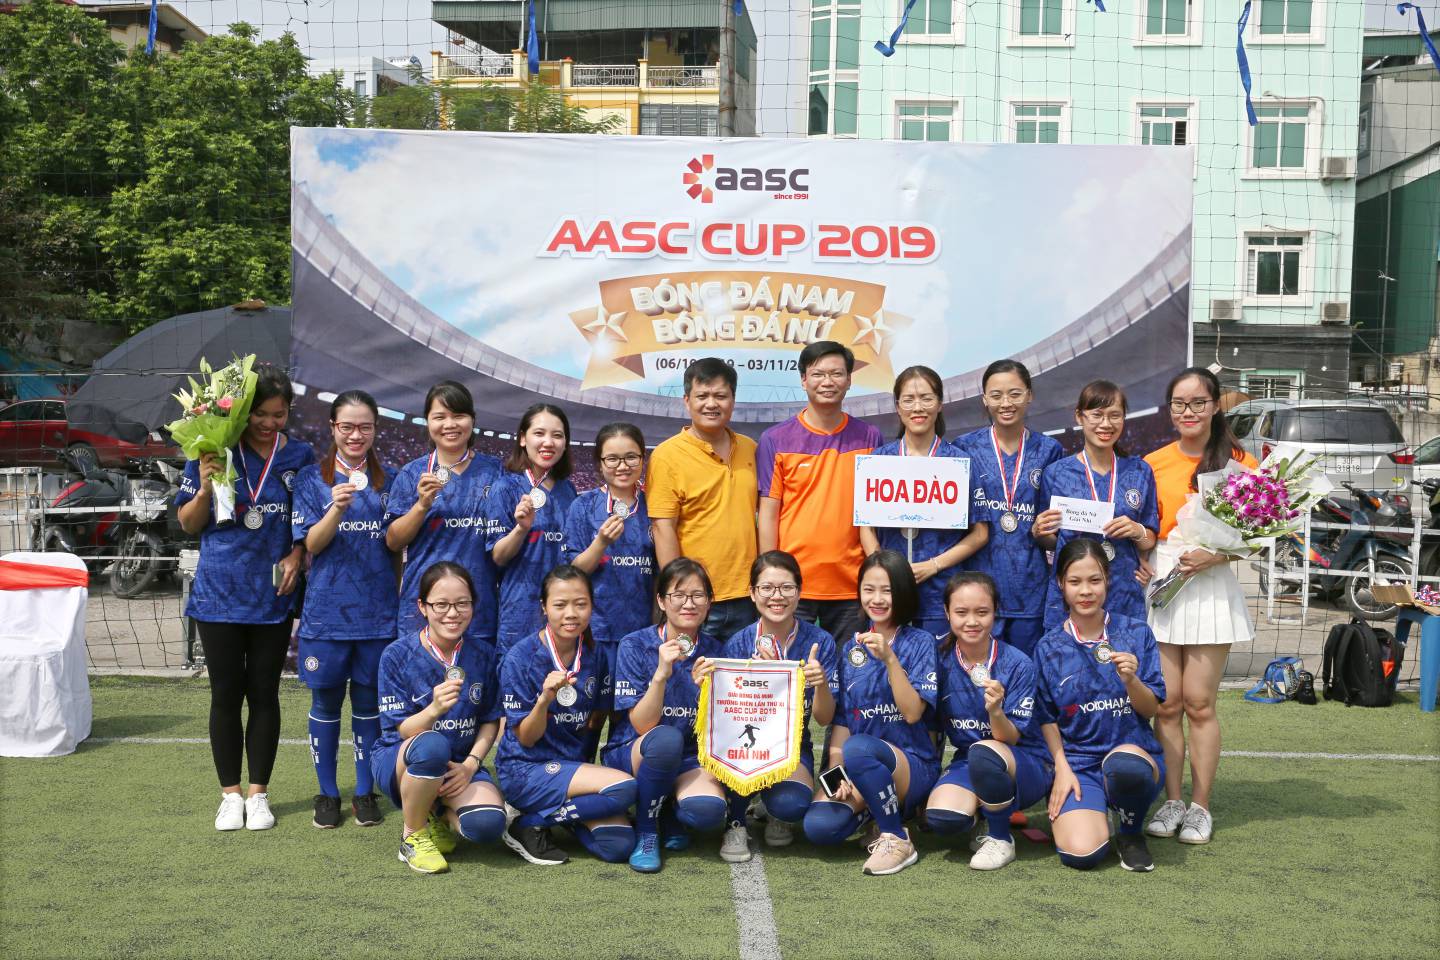 2019 11 05 AASCCUP 004